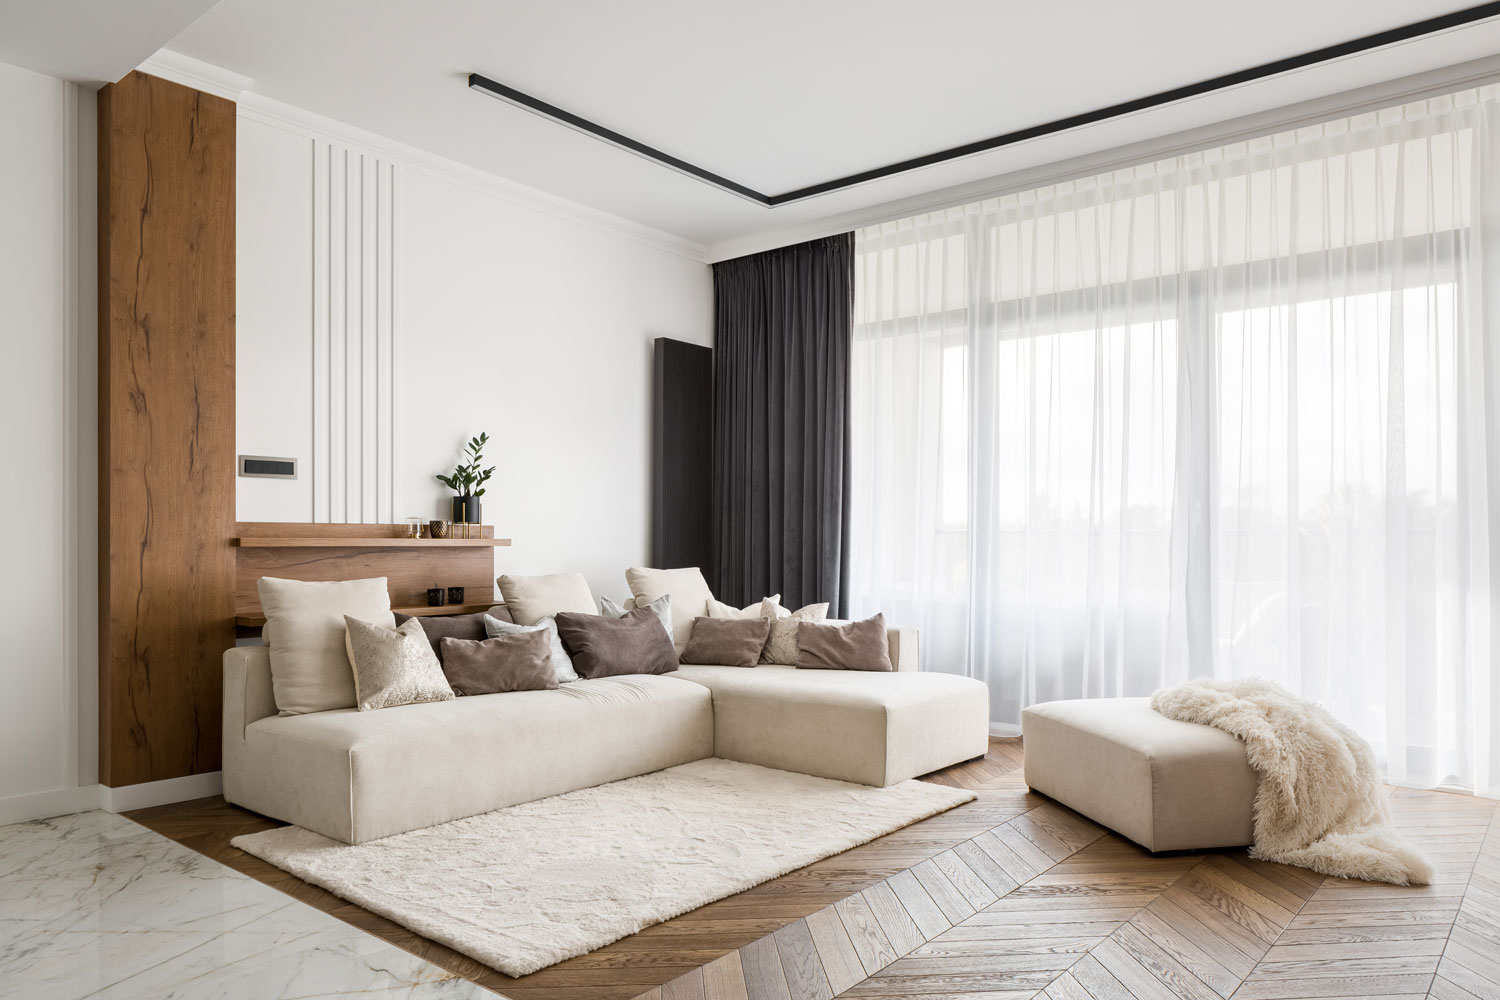 An off white sectional sofa with brown and beige throw pillows and ceiling high curtains